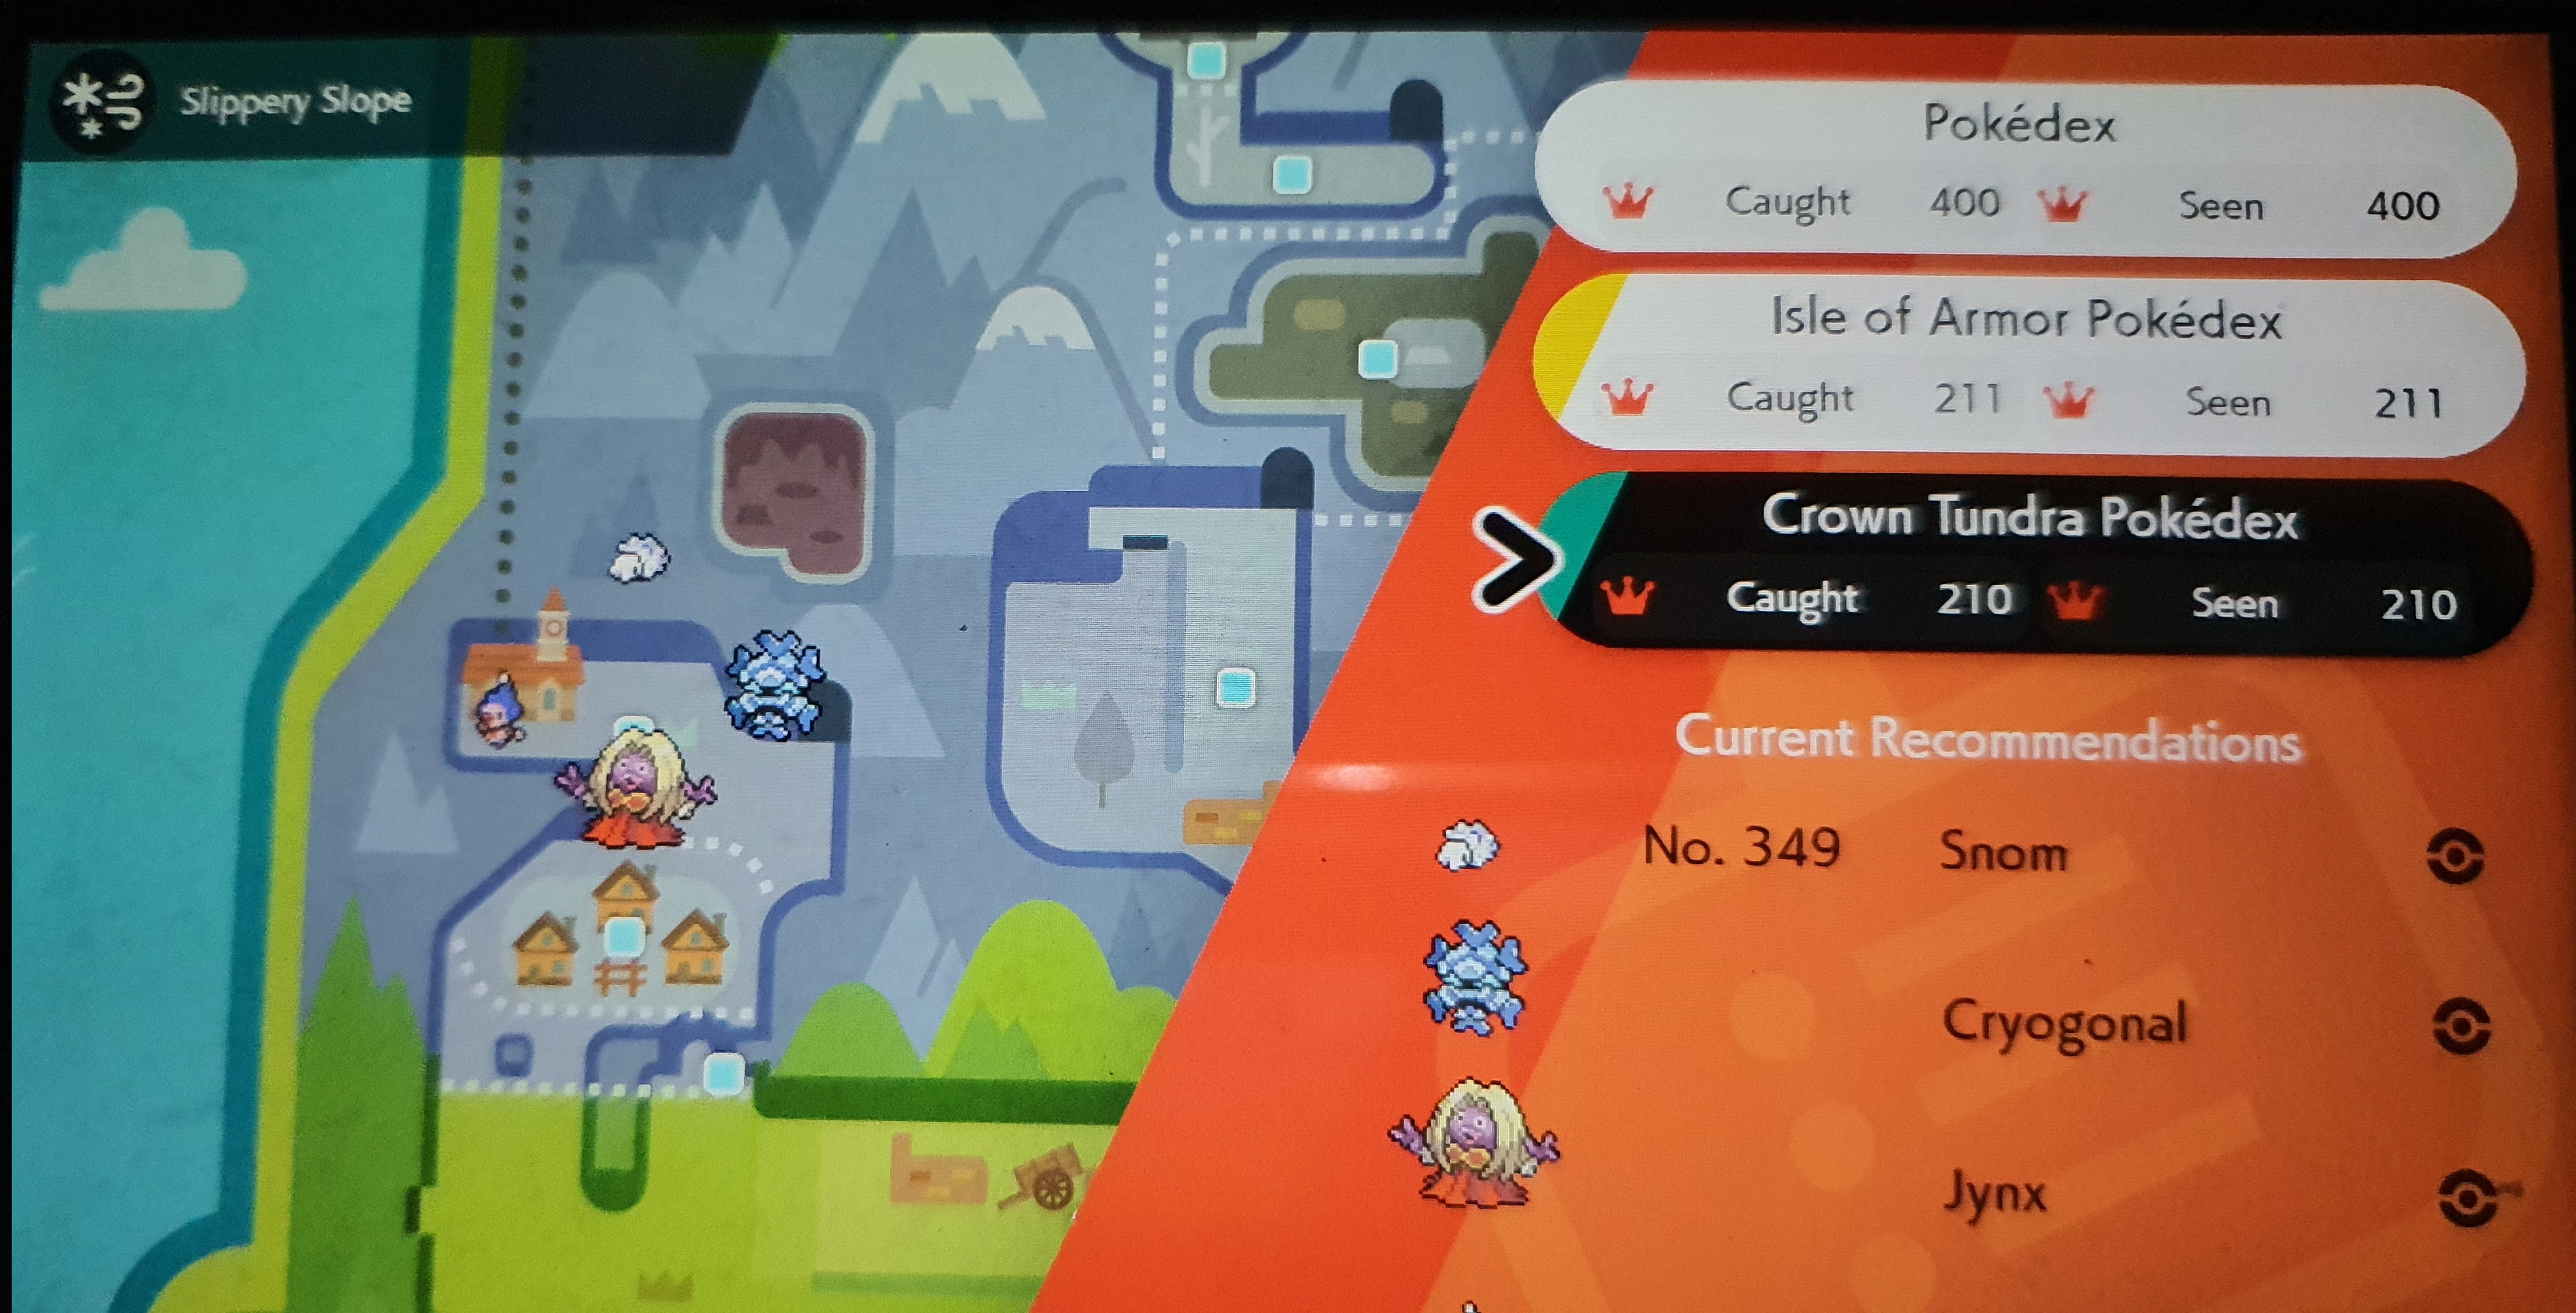 Here's What You Get For Completing The Isle Of Armor Pokedex In